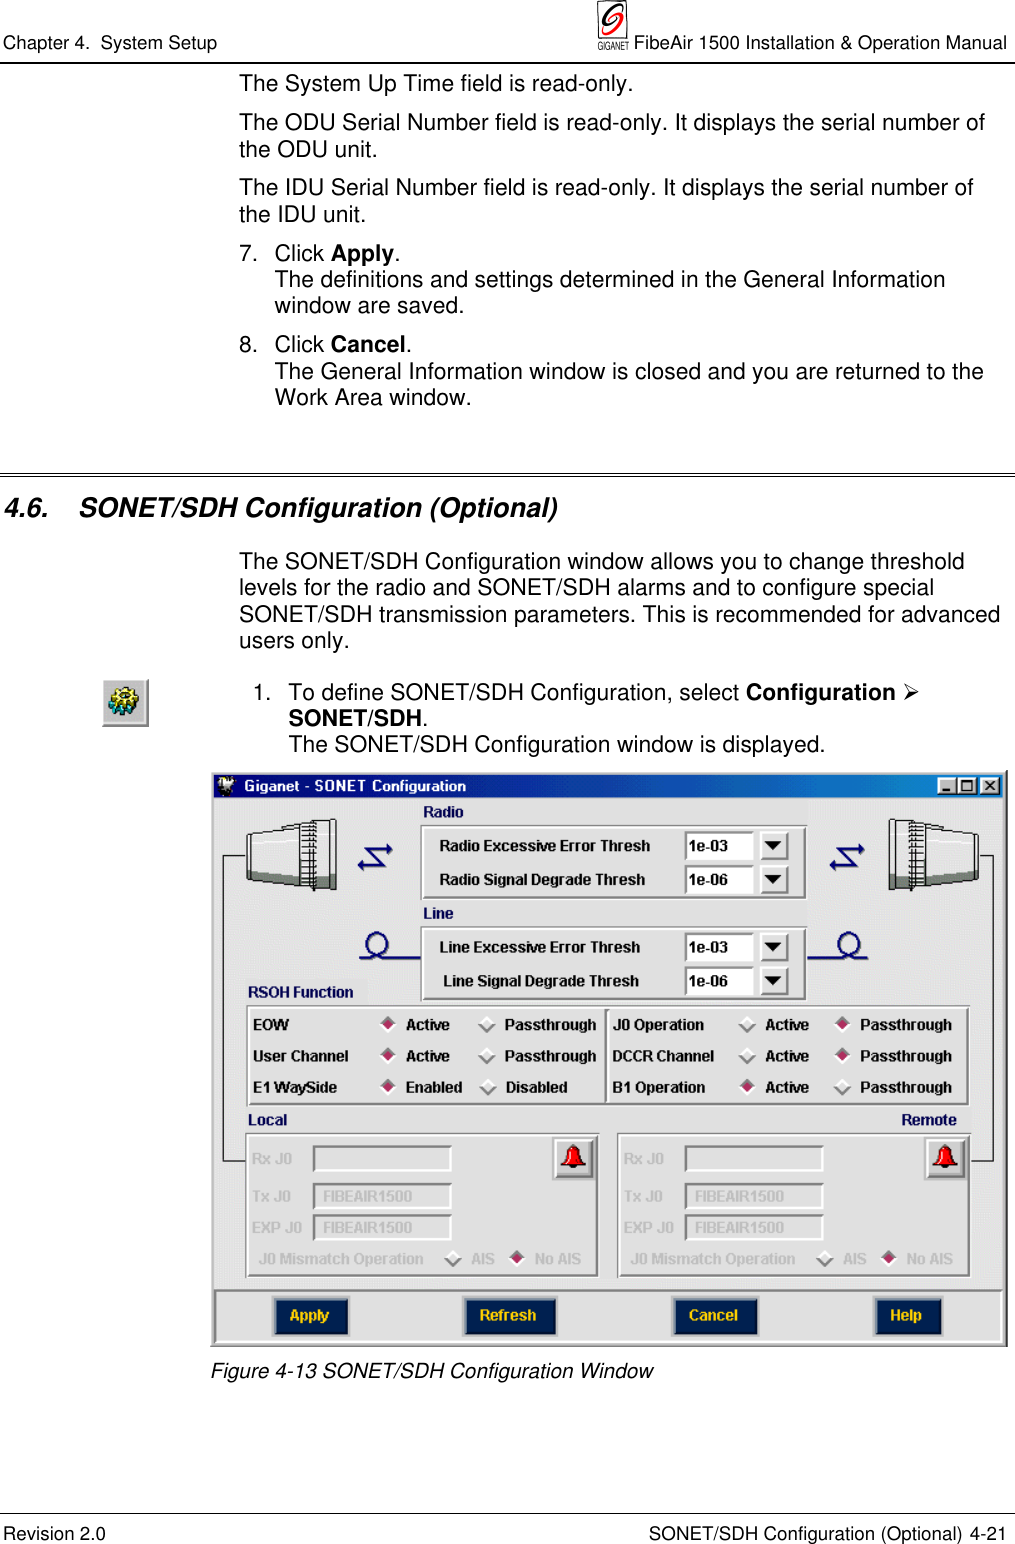 Chapter 4.  System Setup  FibeAir 1500 Installation &amp; Operation ManualRevision 2.0 SONET/SDH Configuration (Optional) 4-21The System Up Time field is read-only.The ODU Serial Number field is read-only. It displays the serial number ofthe ODU unit.The IDU Serial Number field is read-only. It displays the serial number ofthe IDU unit.7. Click Apply.The definitions and settings determined in the General Informationwindow are saved.8. Click Cancel.The General Information window is closed and you are returned to theWork Area window.4.6.  SONET/SDH Configuration (Optional)The SONET/SDH Configuration window allows you to change thresholdlevels for the radio and SONET/SDH alarms and to configure specialSONET/SDH transmission parameters. This is recommended for advancedusers only.1. To define SONET/SDH Configuration, select Configuration ½SONET/SDH.The SONET/SDH Configuration window is displayed.Figure 4-13 SONET/SDH Configuration Window